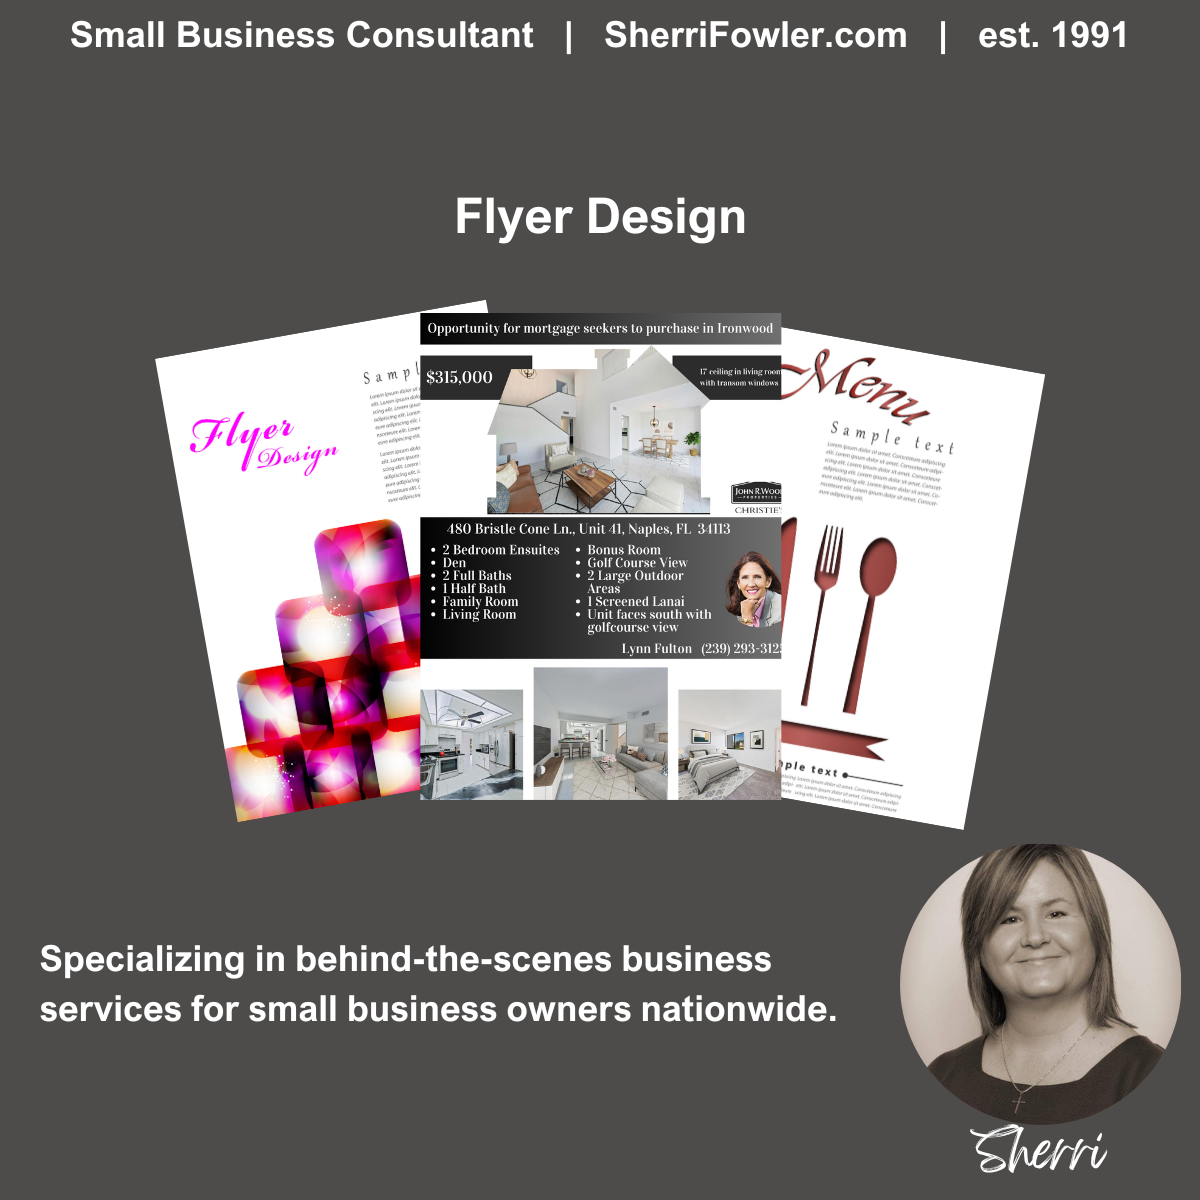 Flyer Design Service for small business owners and nonprofits includes creation and copywriting or content writing at SherriFowler.com